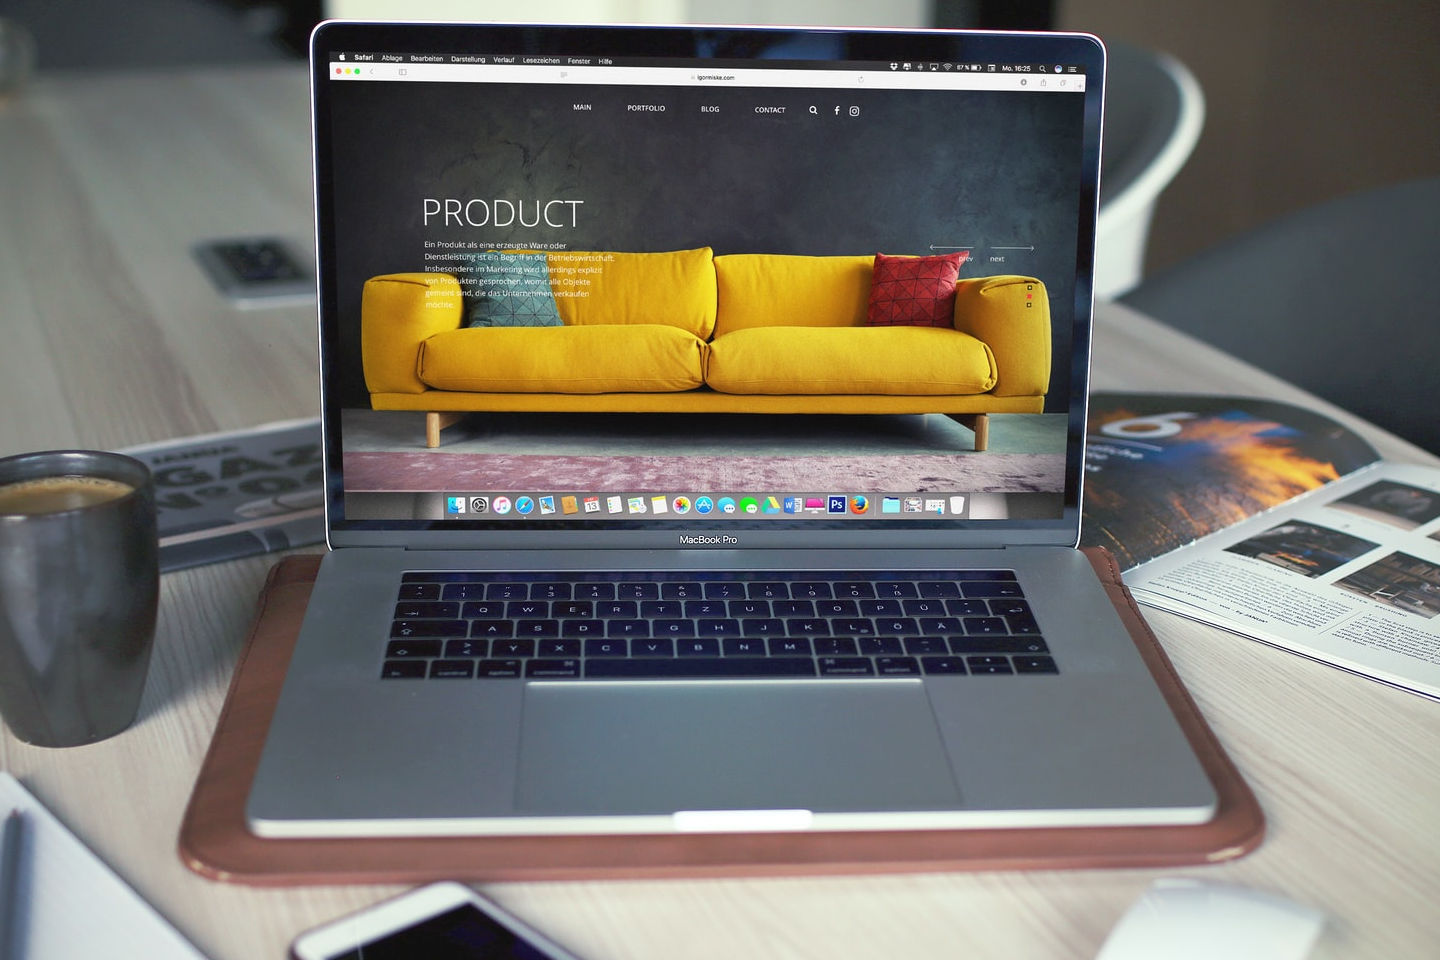 apple mac laptop with a website showing a product 